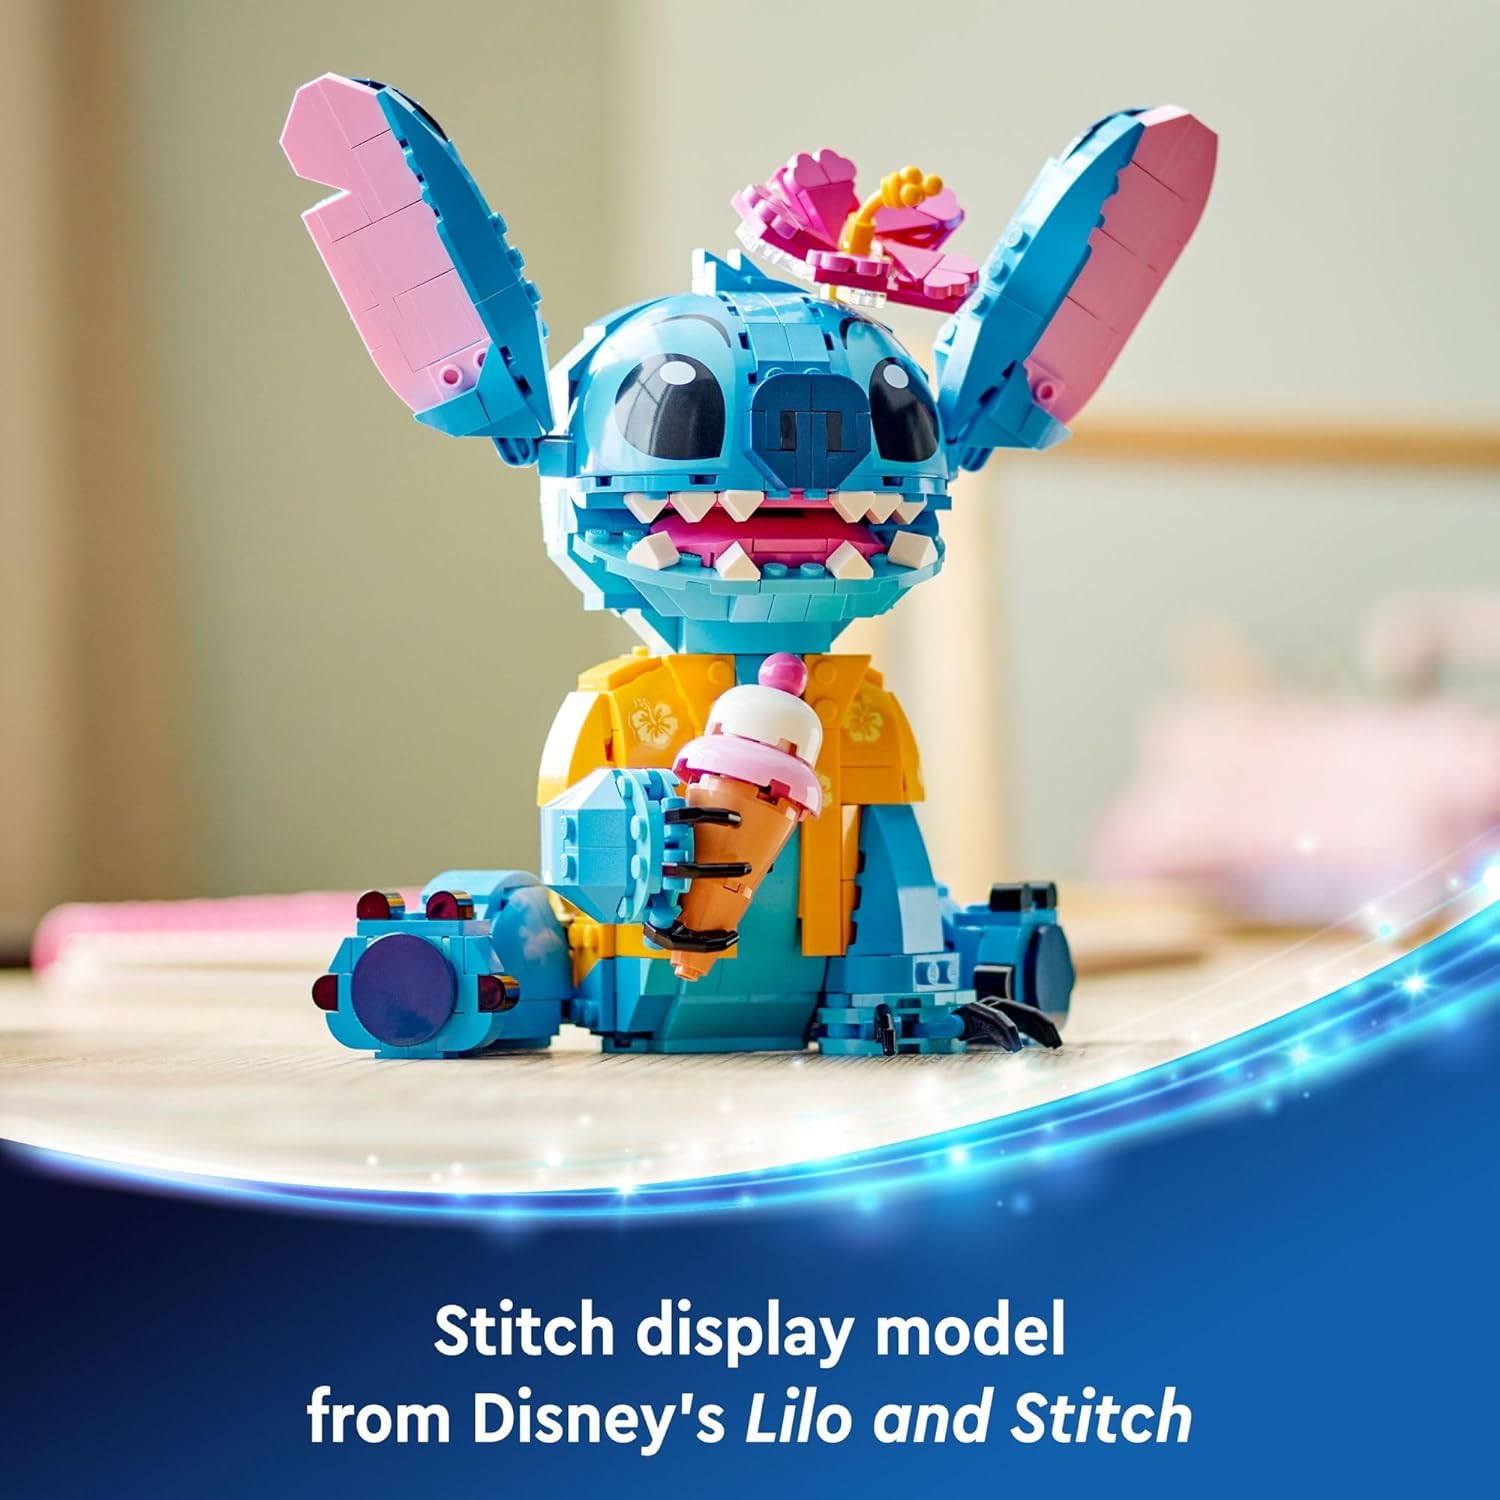 LEGO 43249 Disney Stitch Toy Building Kit, Buildable Figure with Ice Cream Cone, Fun Disney Gift for Girls, Boys and Lovers of The Hit Movie Lilo and Stitch.